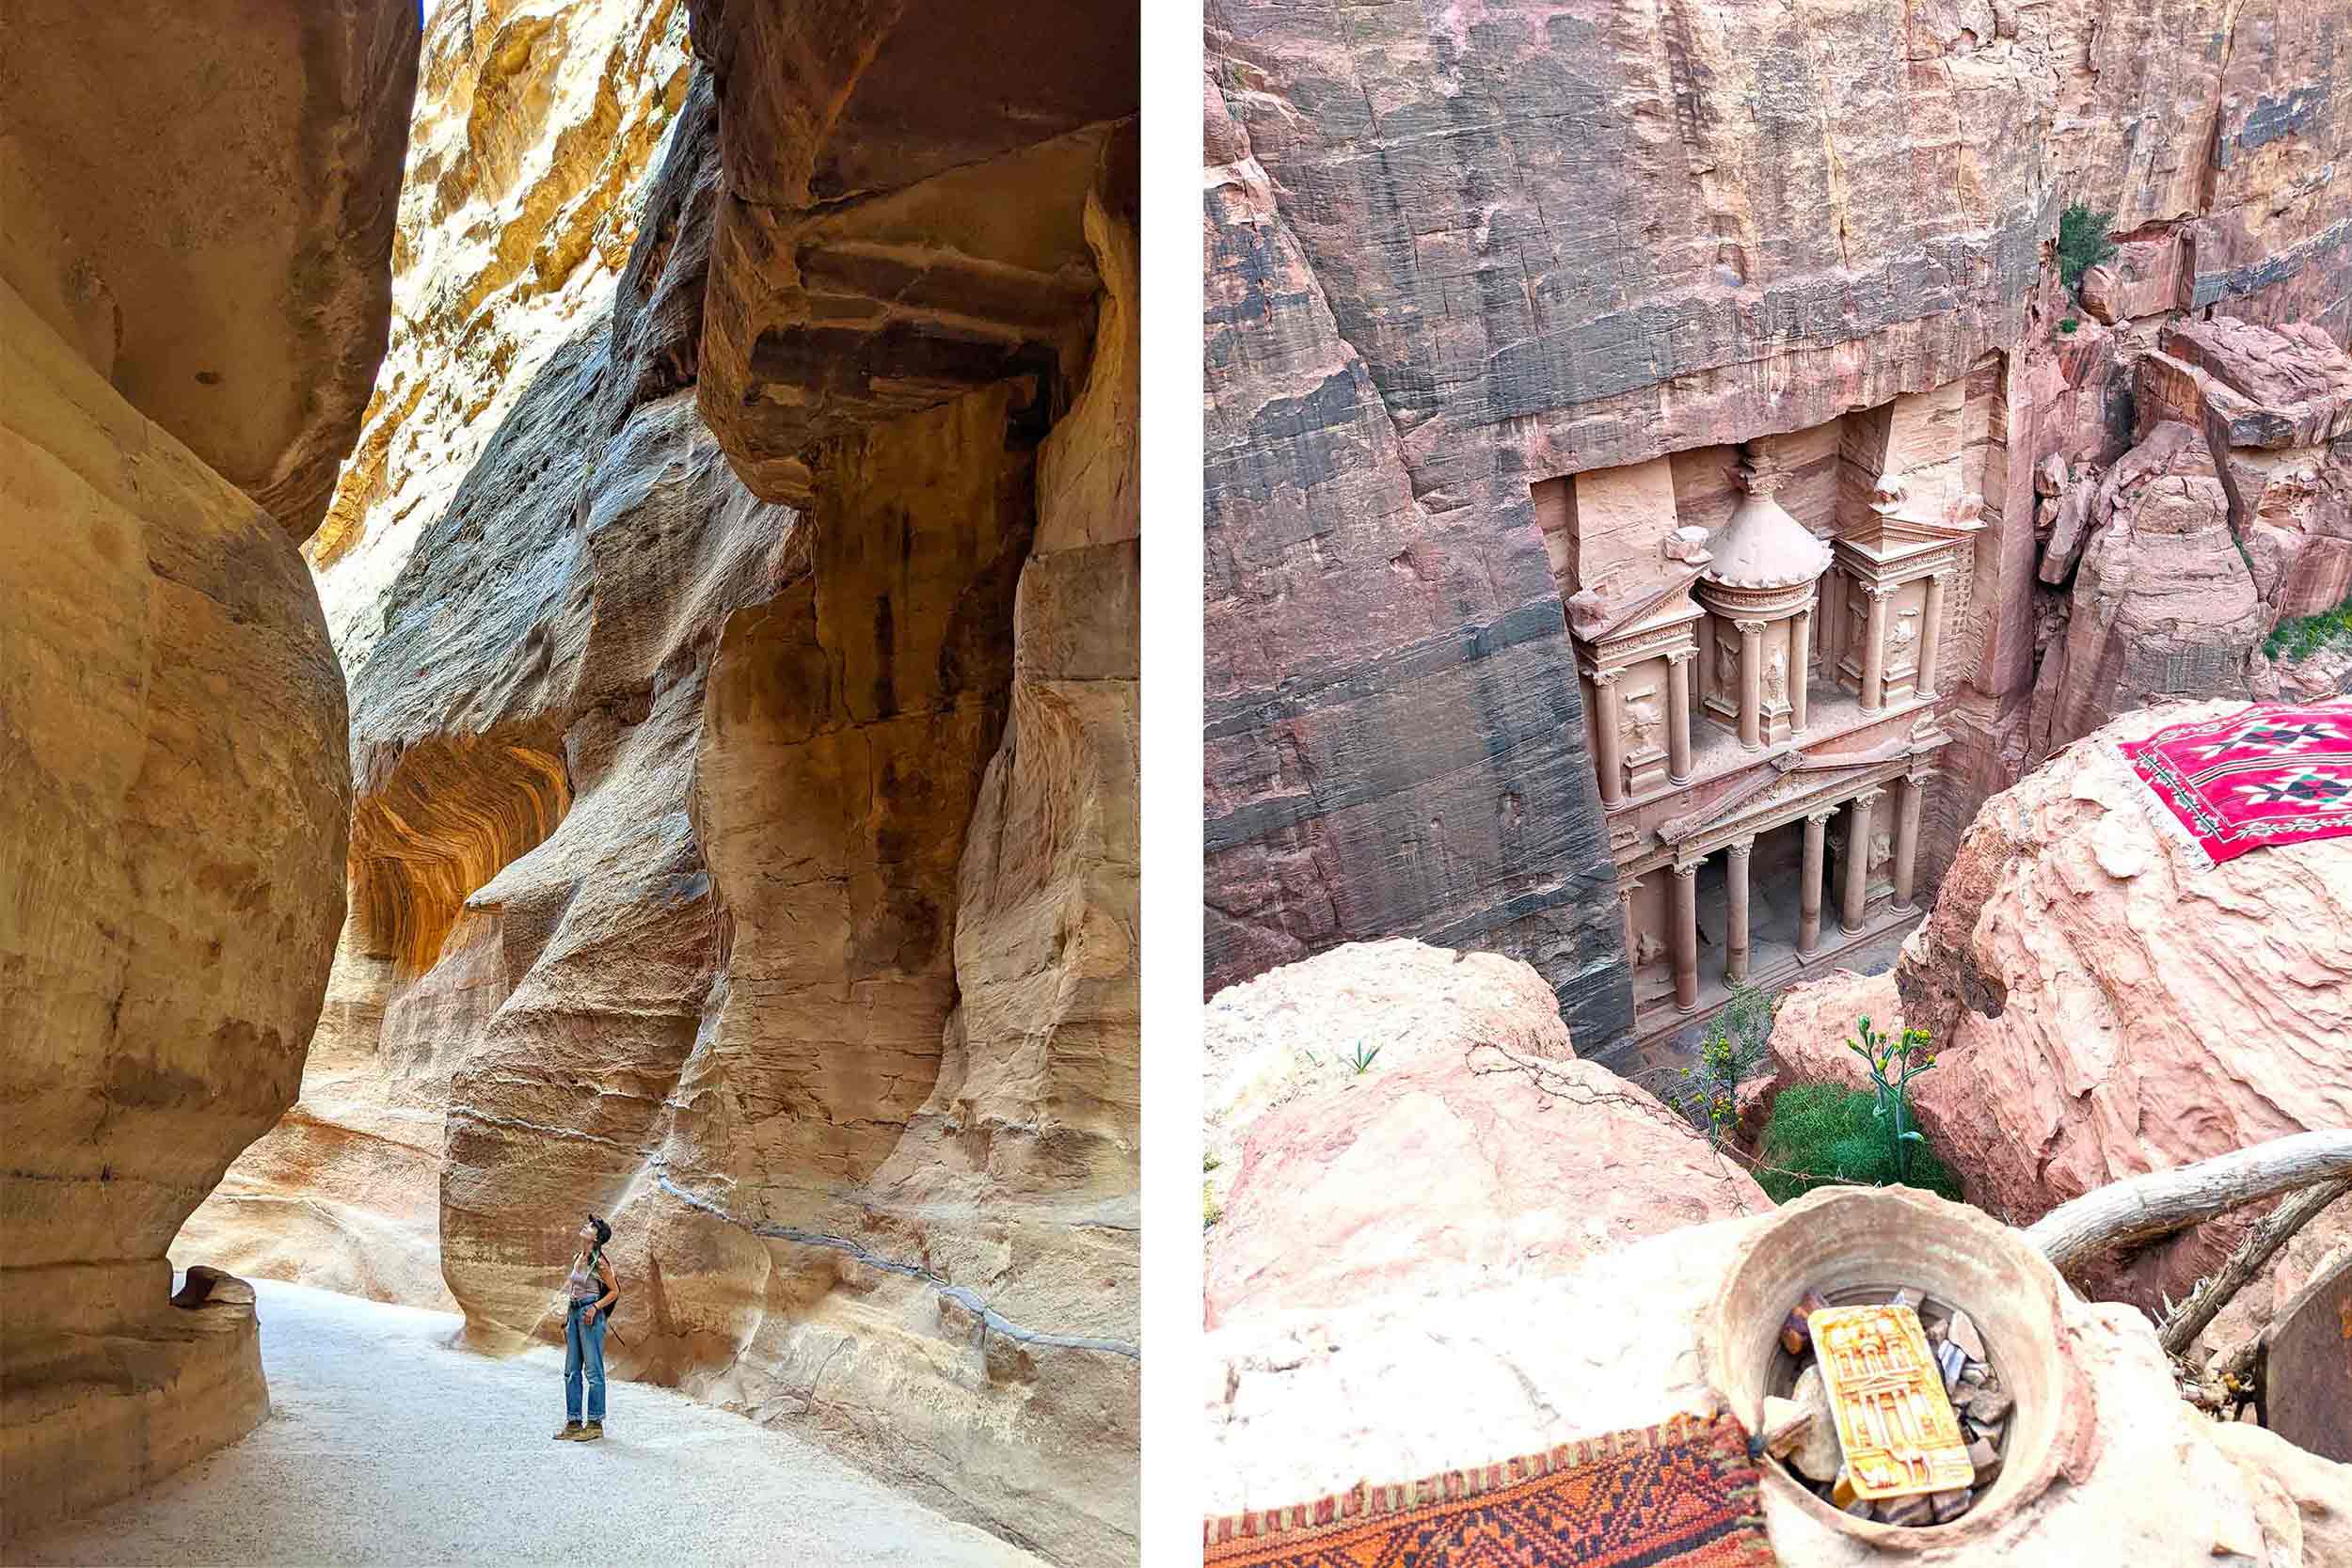 Admiring the walls of Al Siq Canyon on the walk to Petra’s Treasury in Jordan & Overhead viewpoint of the Treasury (Al Khazneh), Petra’s most famous monument